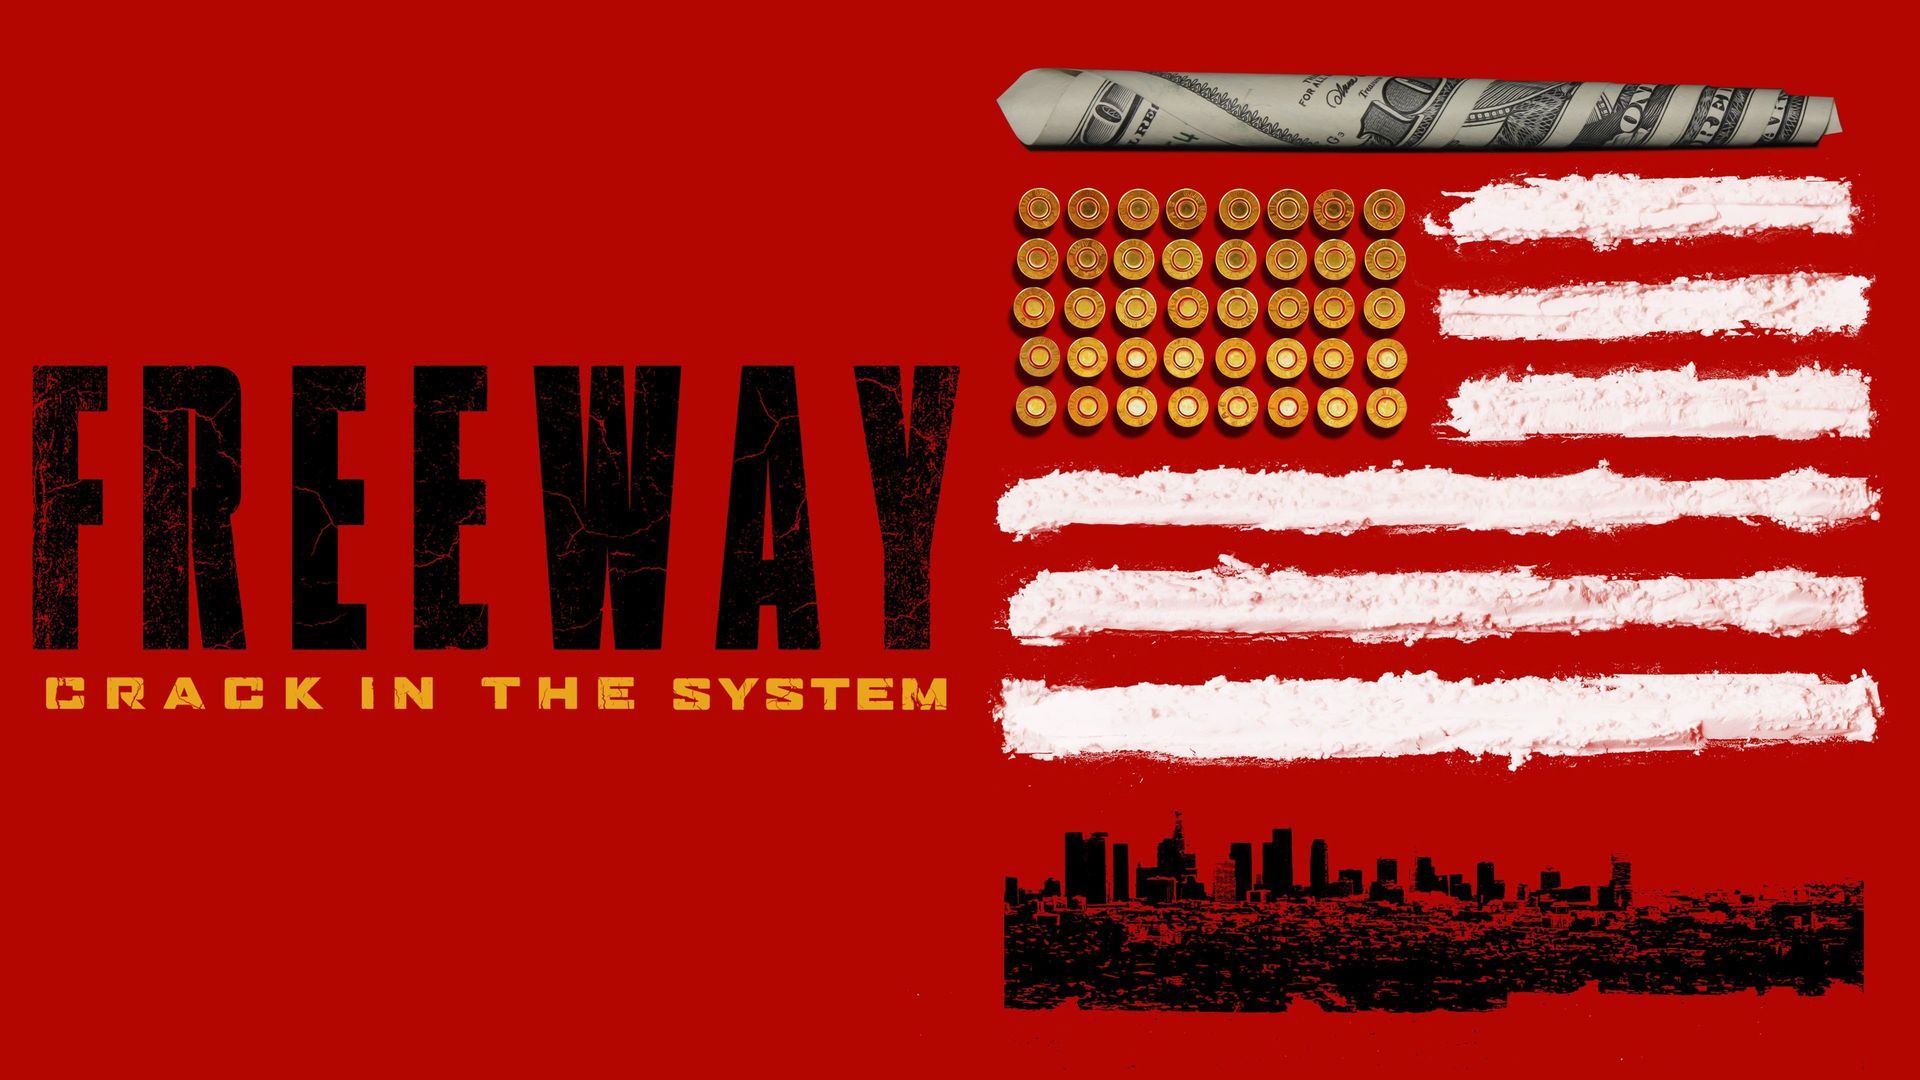 where to watch freeway crack in the system documentary